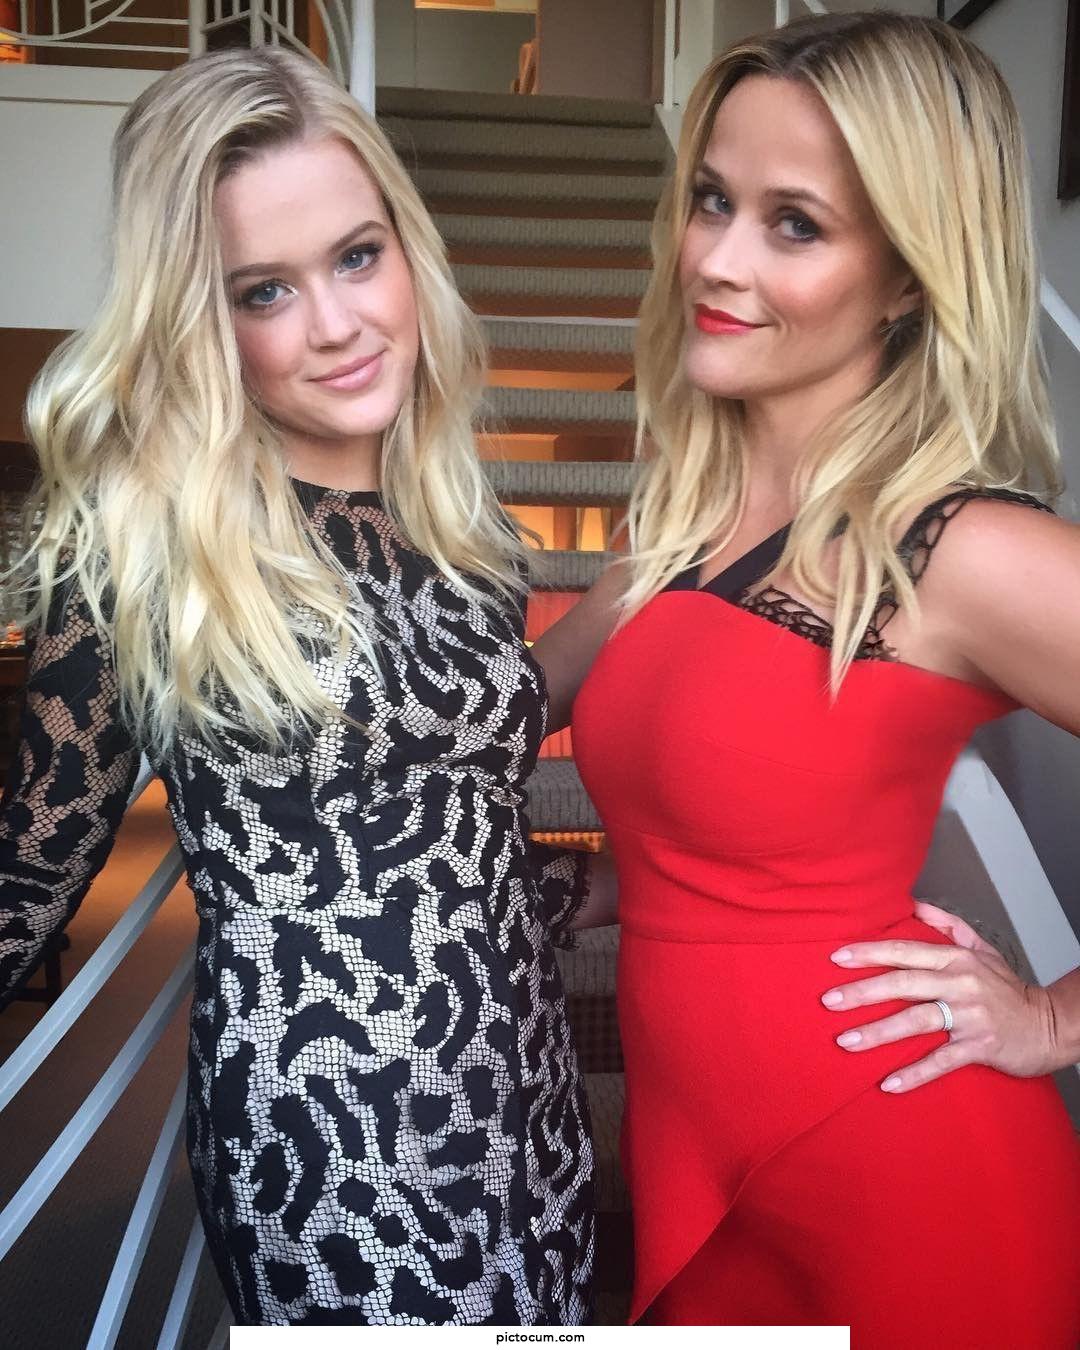 Love to fantasize about celebs and their daughter’s, especially Reese Witherspoon and her daughter Ava. Hit me up if you do the same.